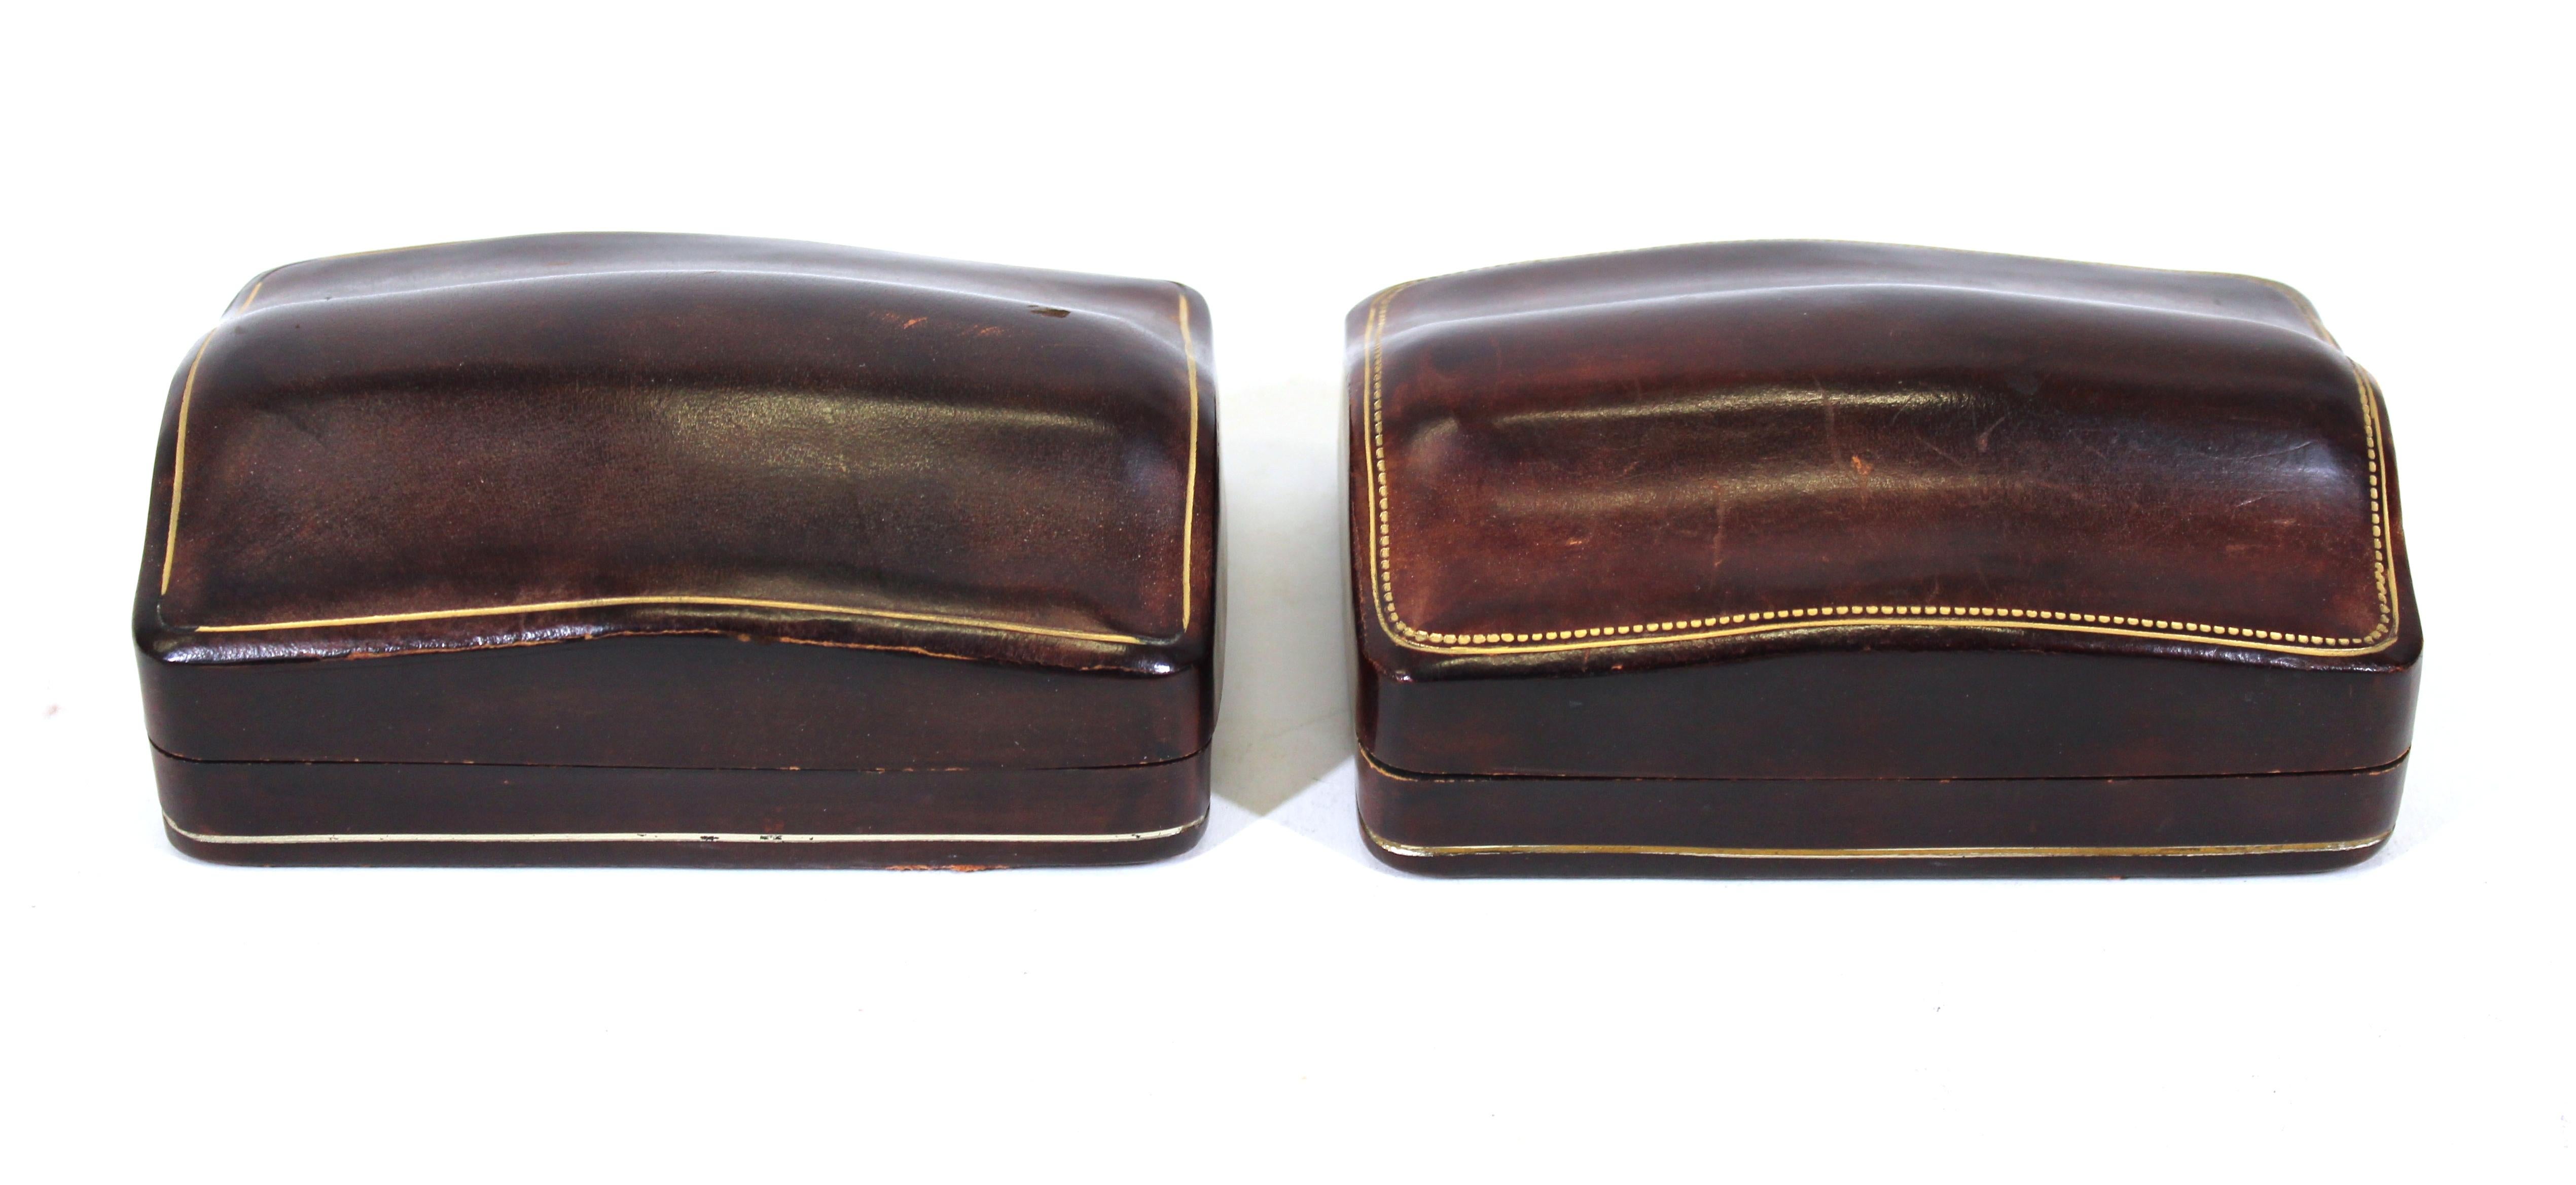 Pair of Florentine handmade leather humpback trinket boxes with gold embossing, circa 1960's.